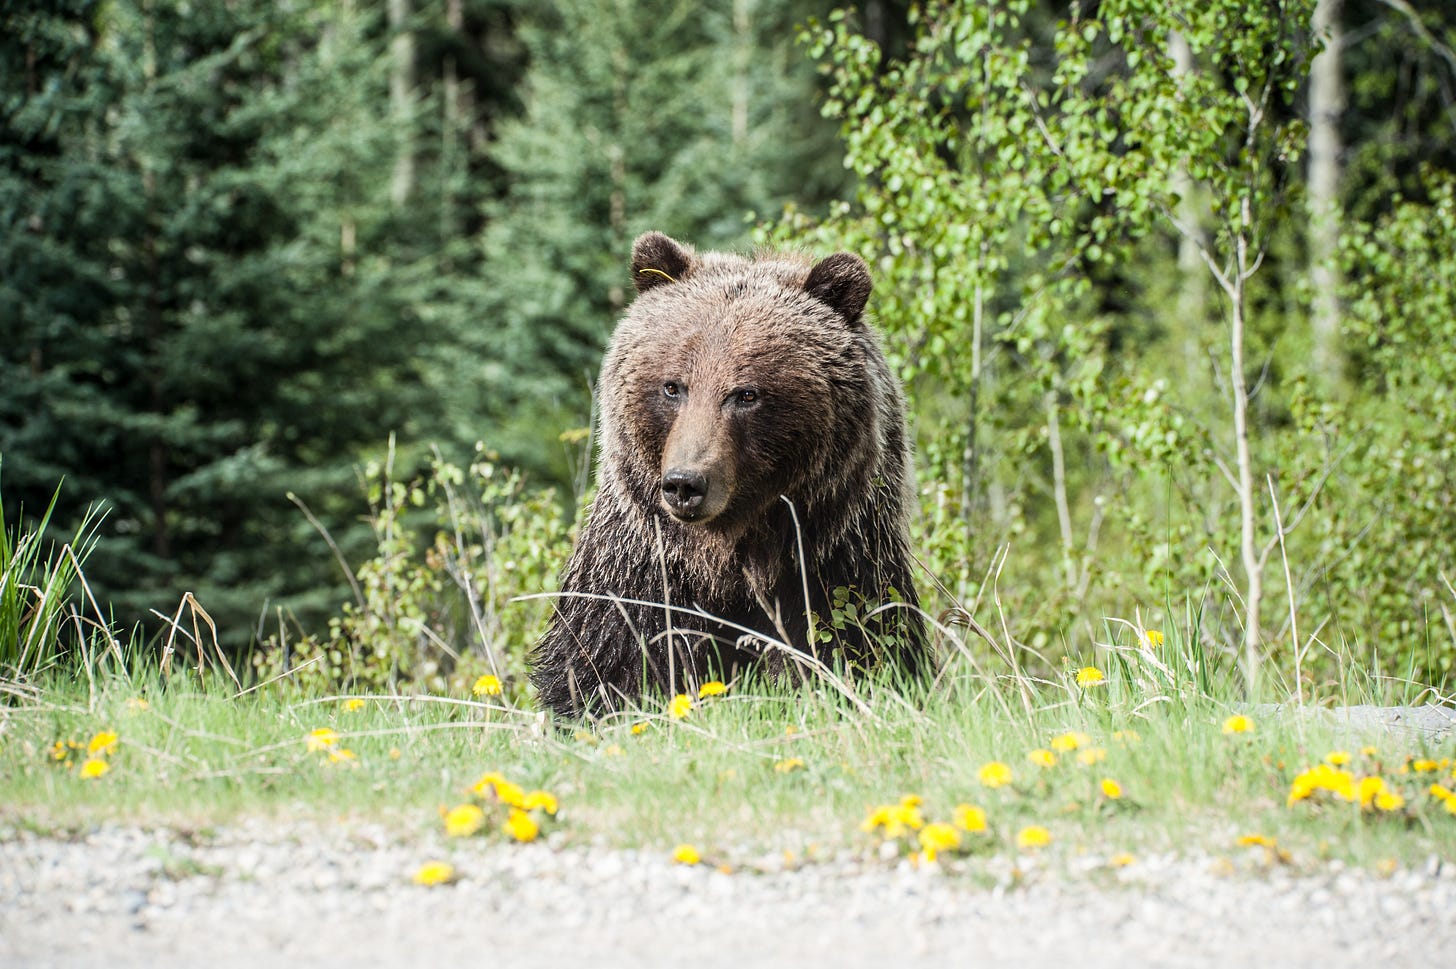 A brown bear in the woods